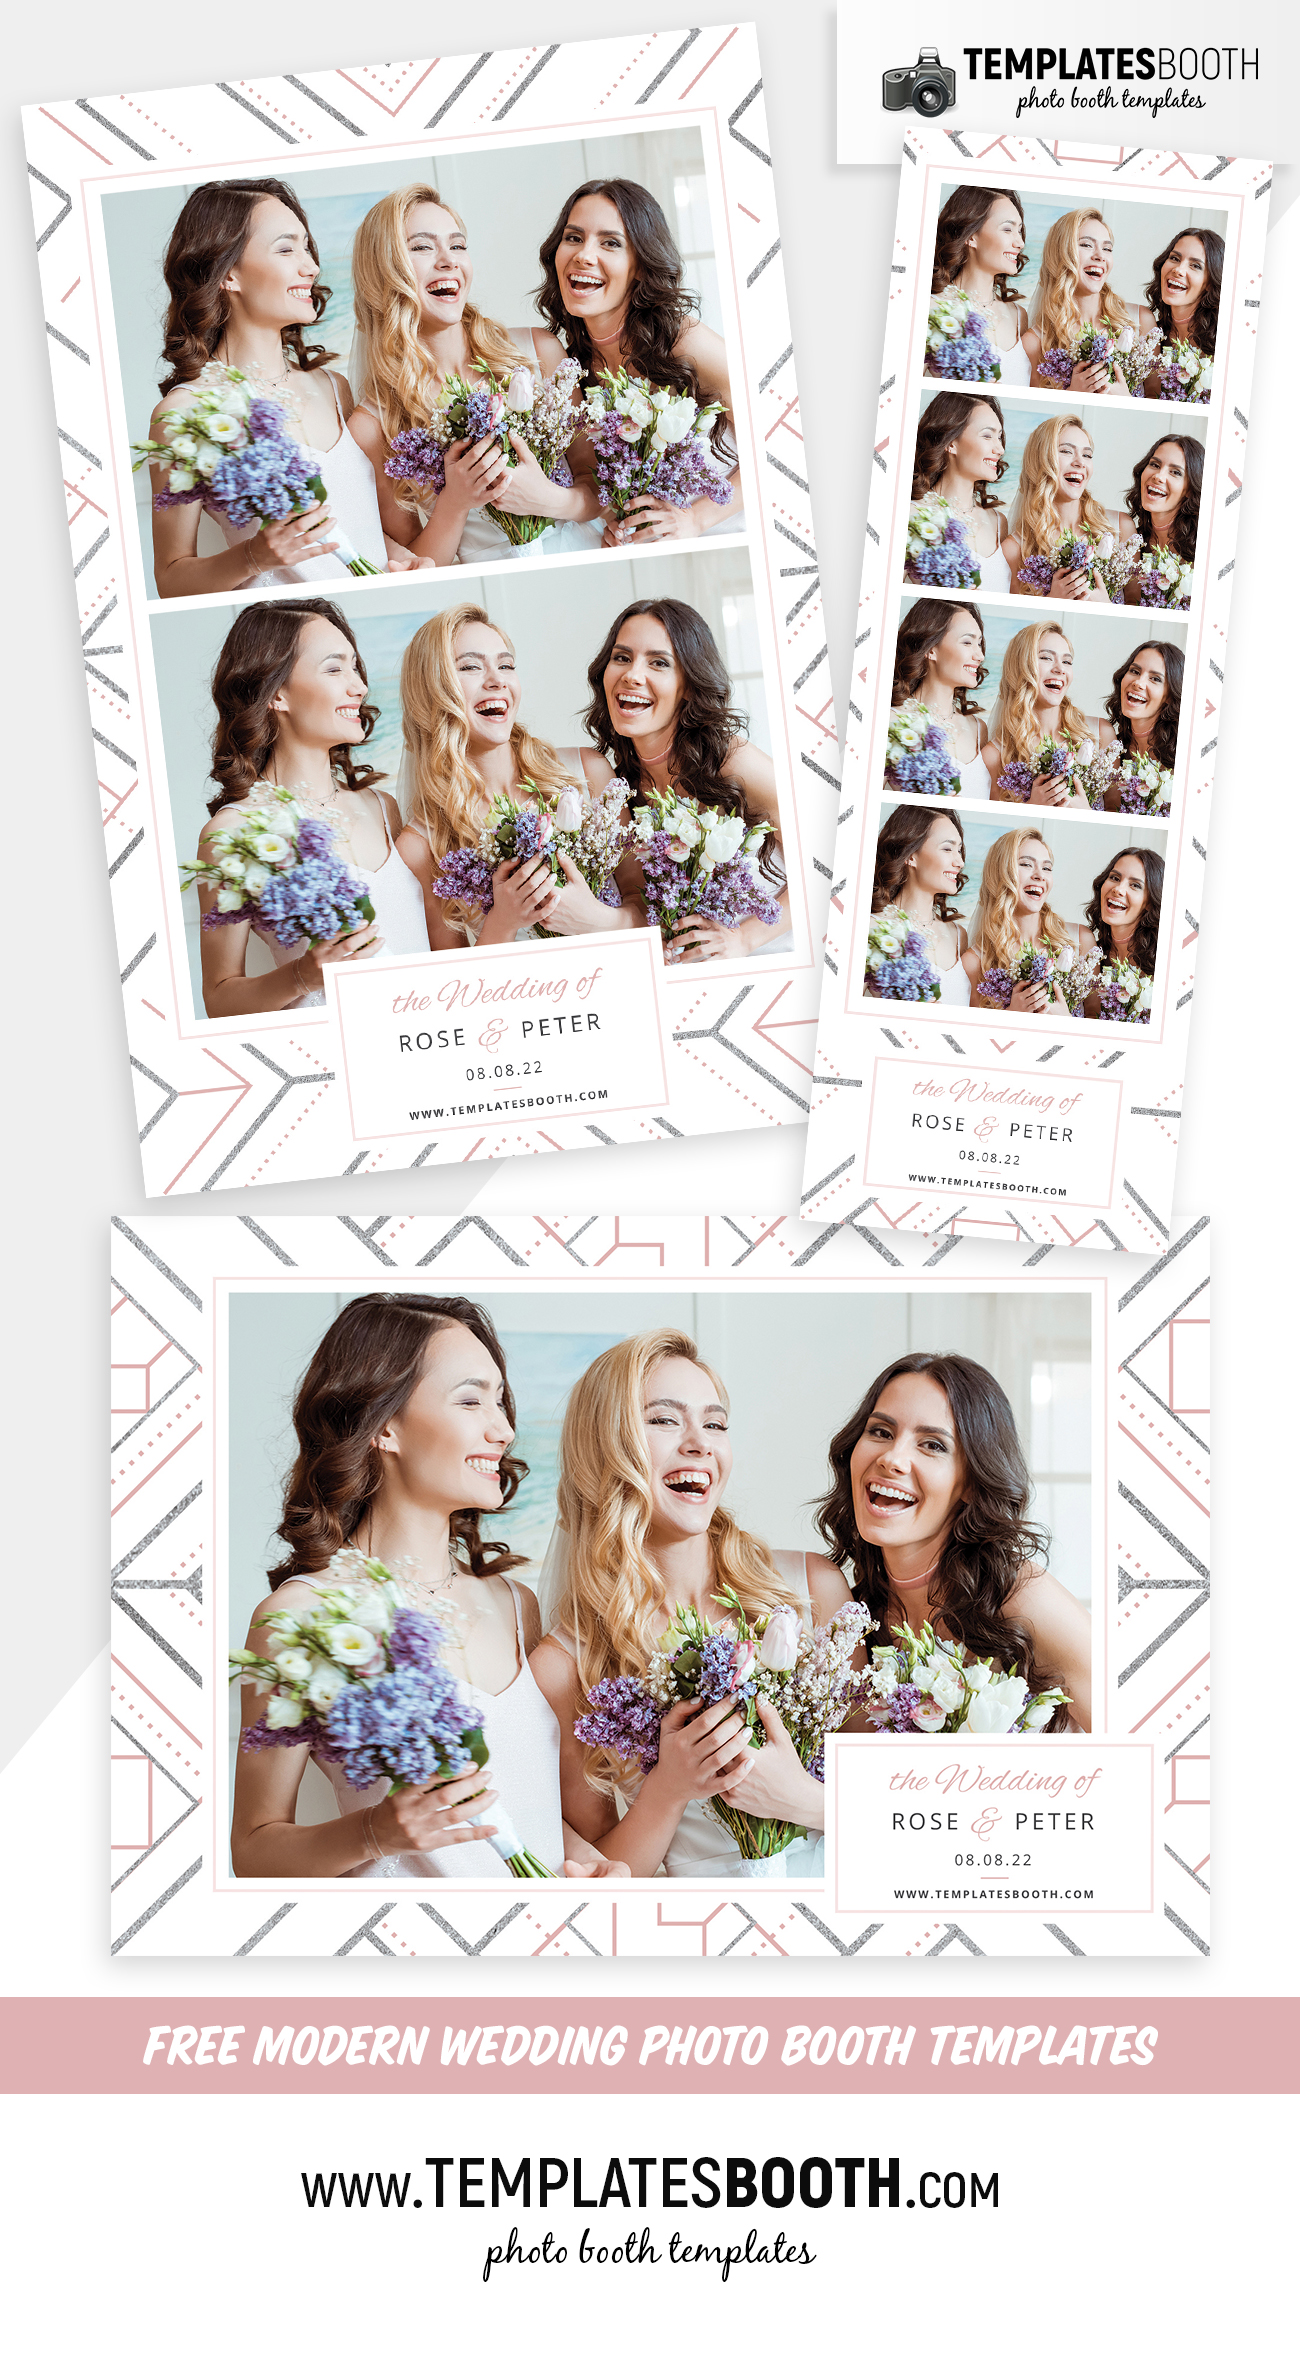 Detail Photo Booth Template Free Download Nomer 2